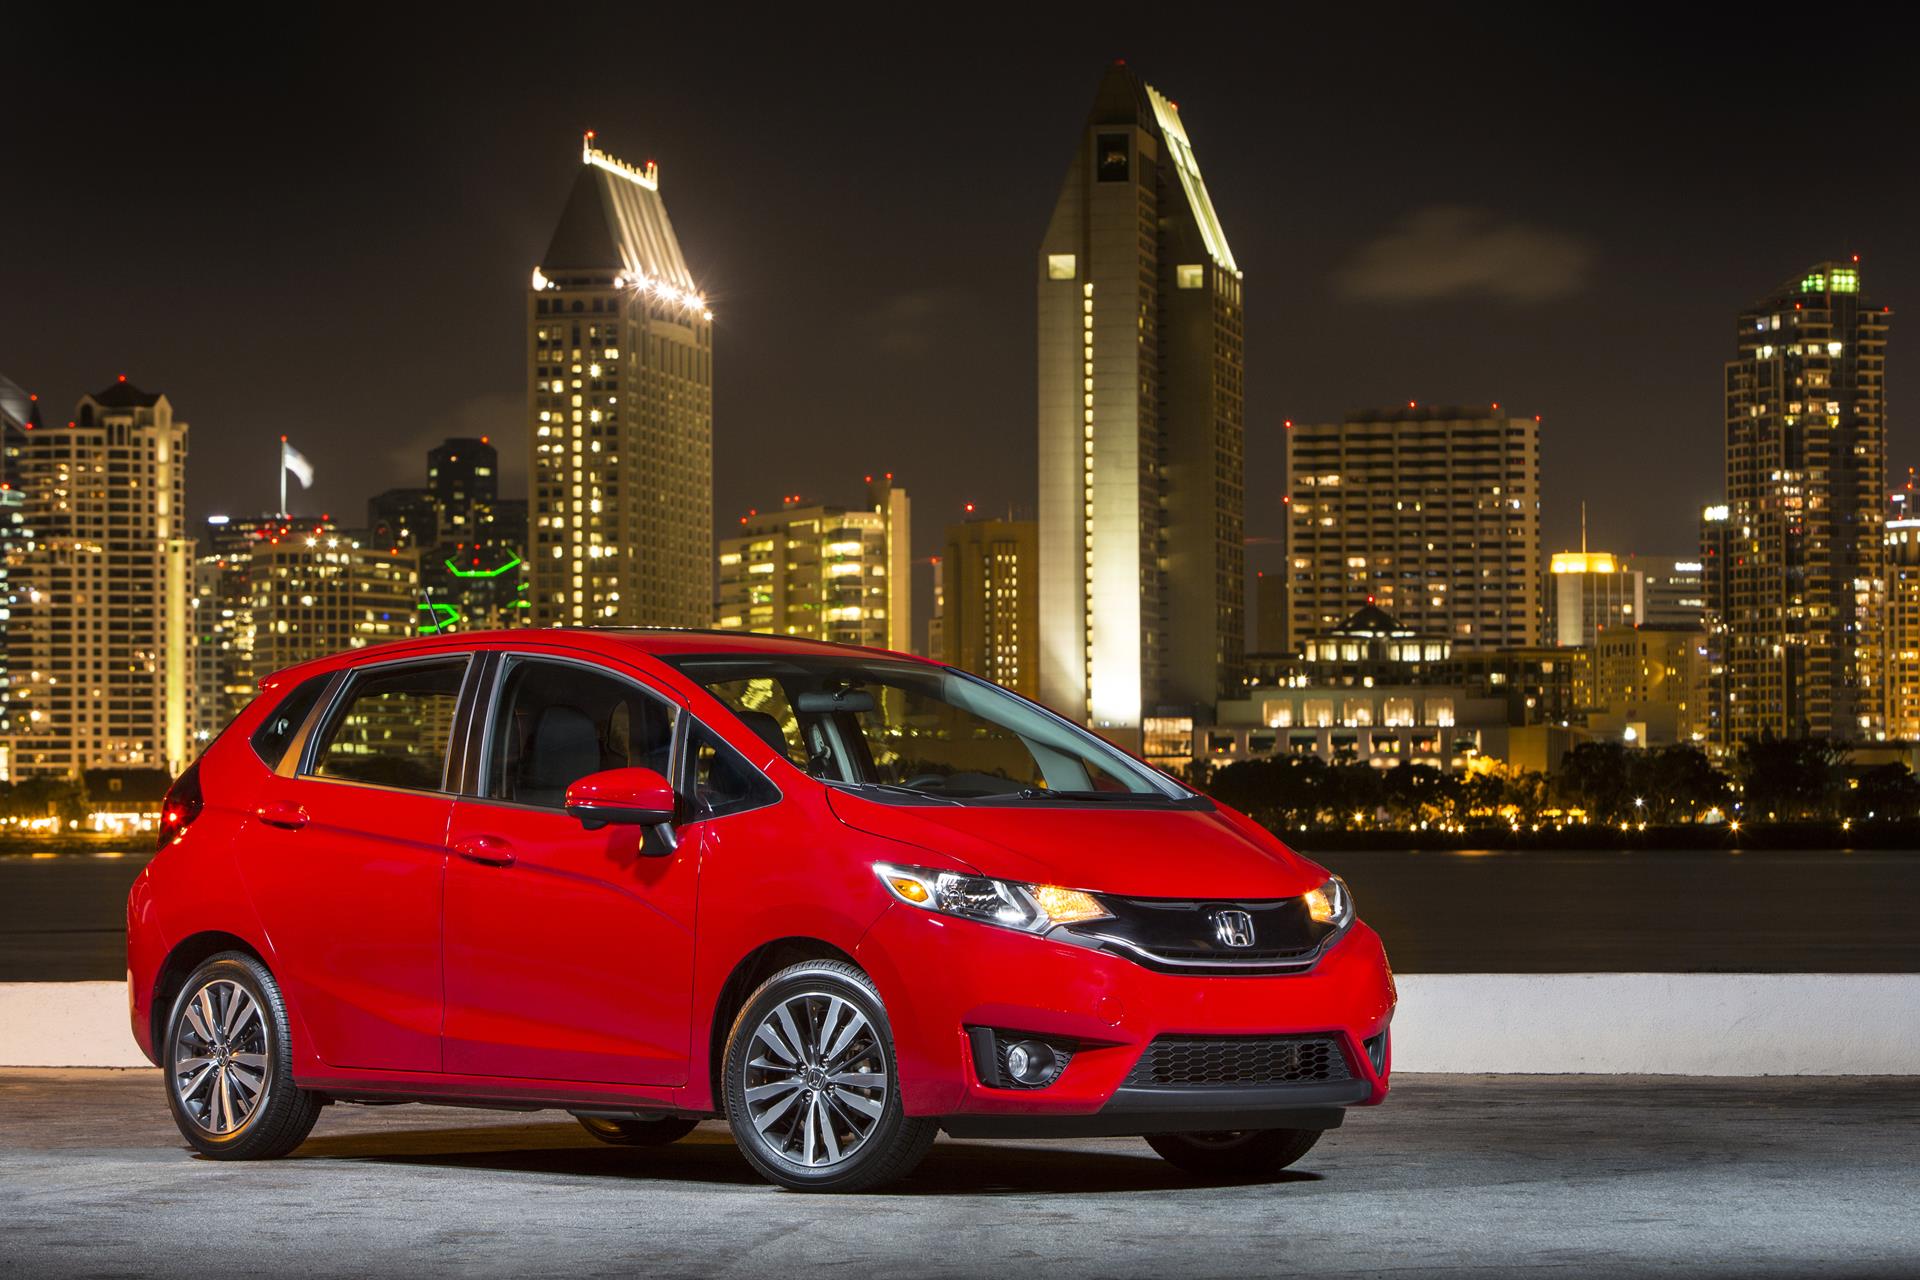 ALL-NEW 2015 HONDA FIT ACHIEVES HIGHEST OVERALL VEHICLE SCORE FROM THE NATIONAL HIGHWAY TRAFFIC SAFETY ADMINISTRATION